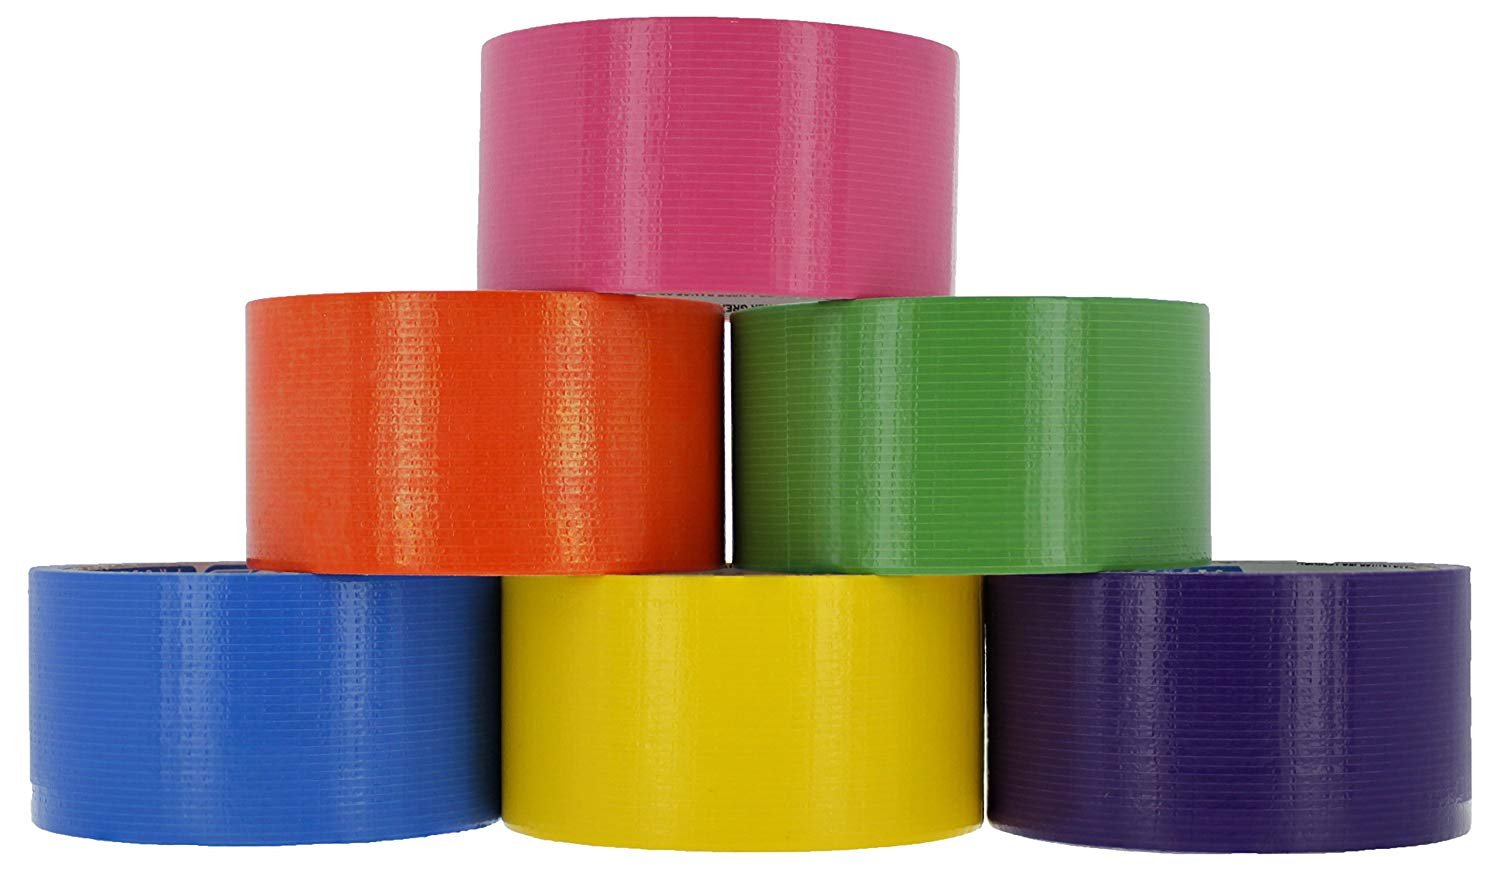 RAM-PRO Heavy-Duty Duct TapeAssorted Colors Pack of 6 Rolls 1.88-inch x 10 Y